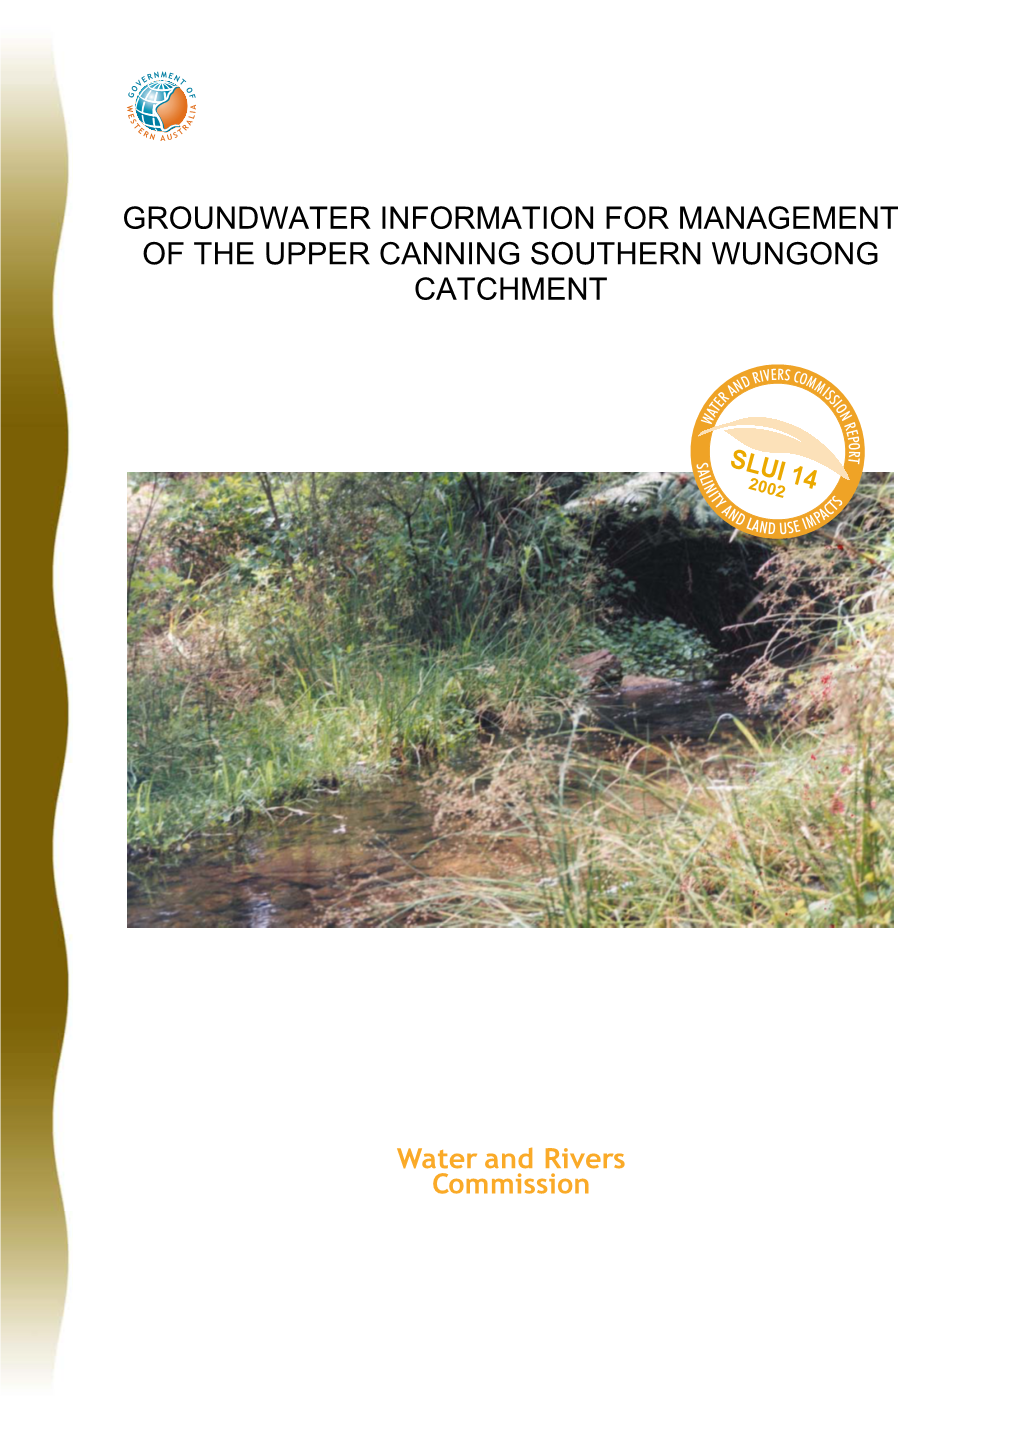 Groundwater Information for Management in the Upper Canning